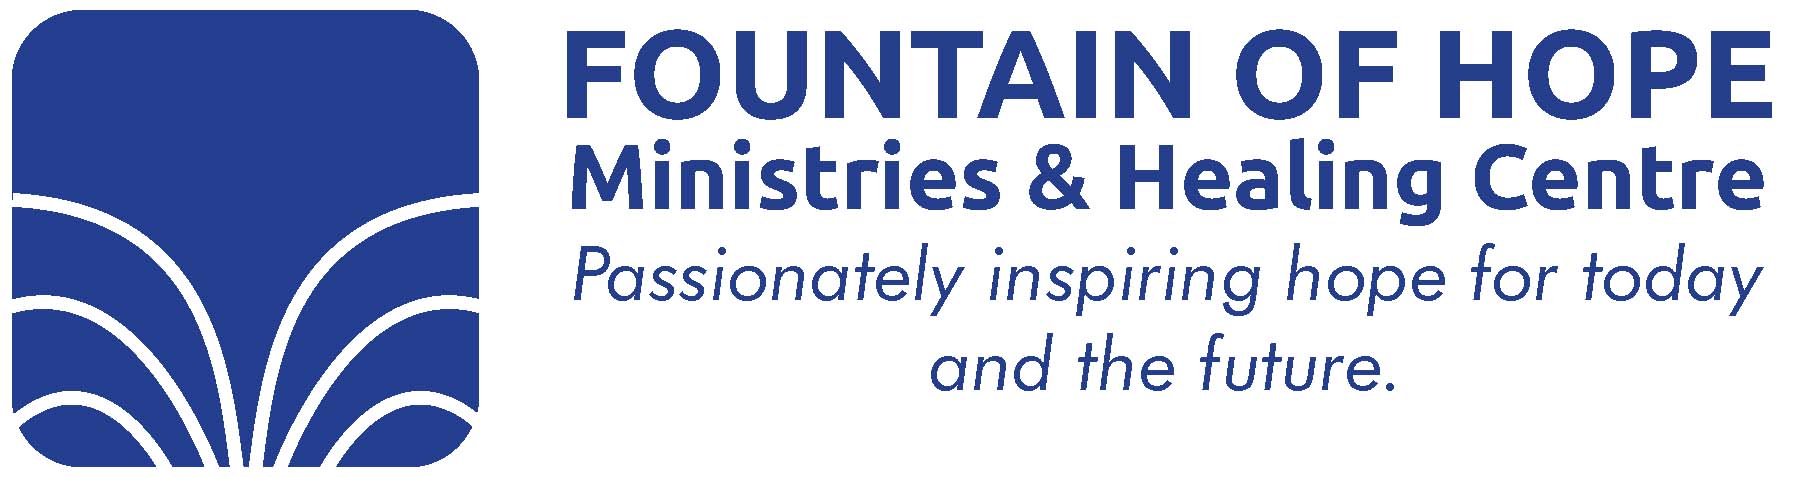 Fountain of Hope Ministries & Healing Centre